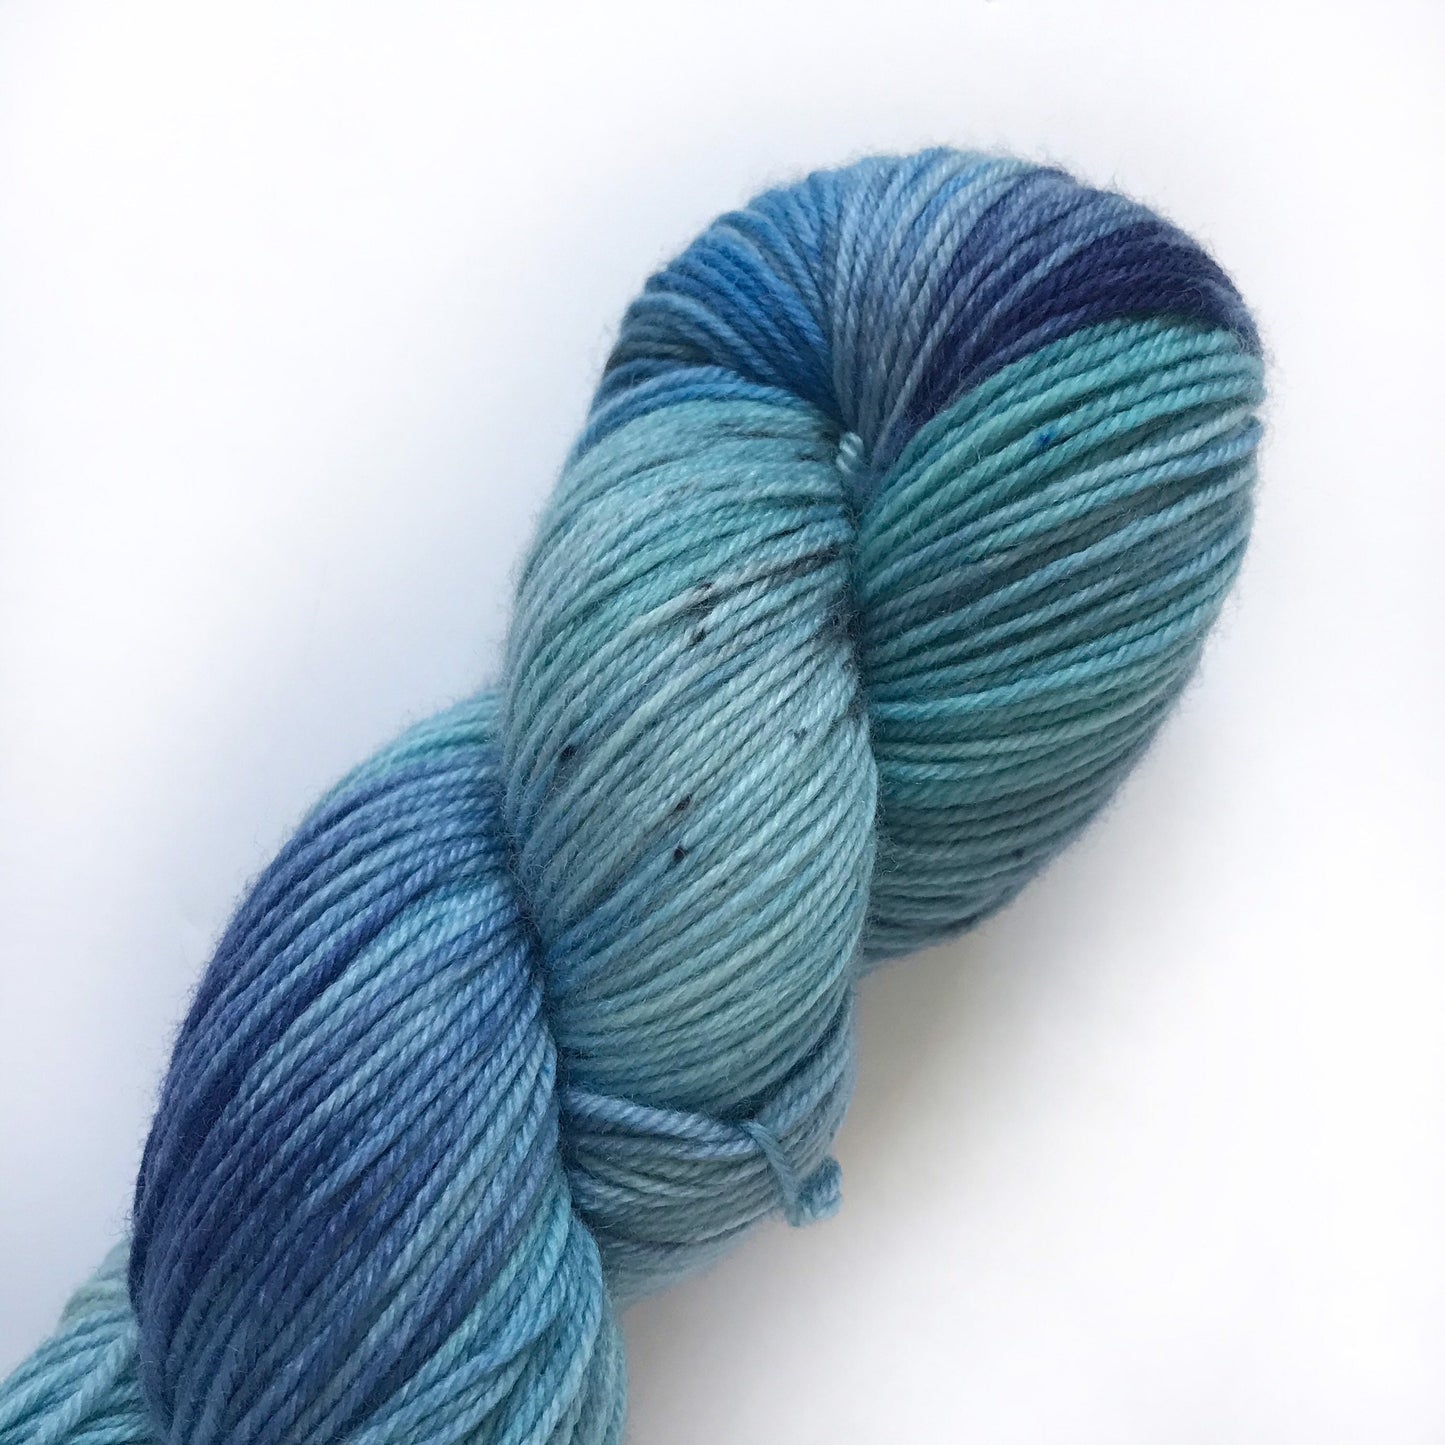 CASCADE - Blue Black Turquoise Speckled SUS